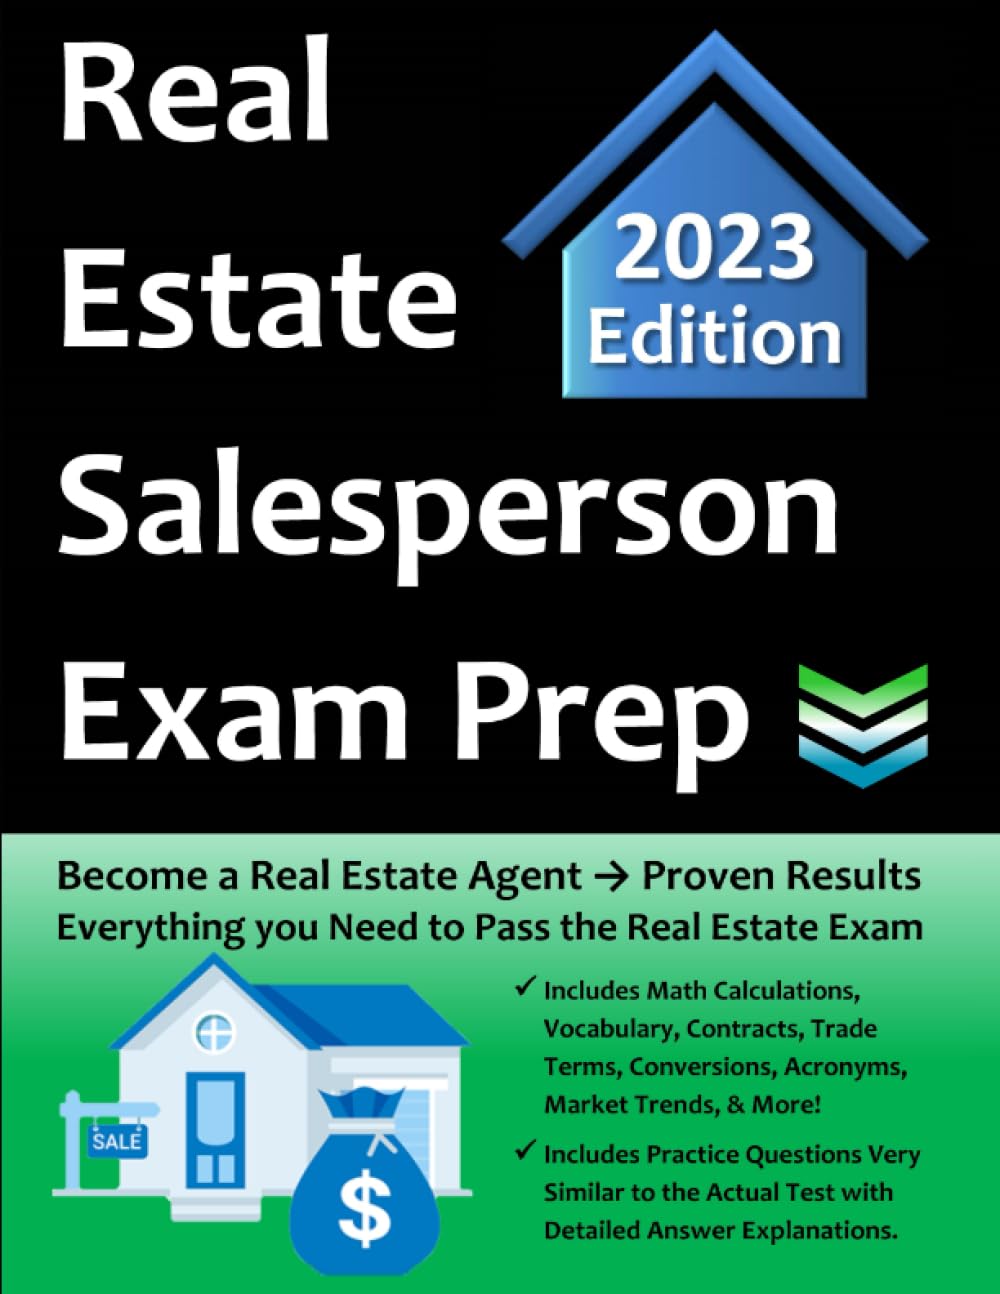 National Real Estate Salesperson License Exam Prep: Everything You Need to Become a Real Estate Agent → Study Guide, Math Calculations, Practice Test Similar to Exam, Term Dictionary & More!